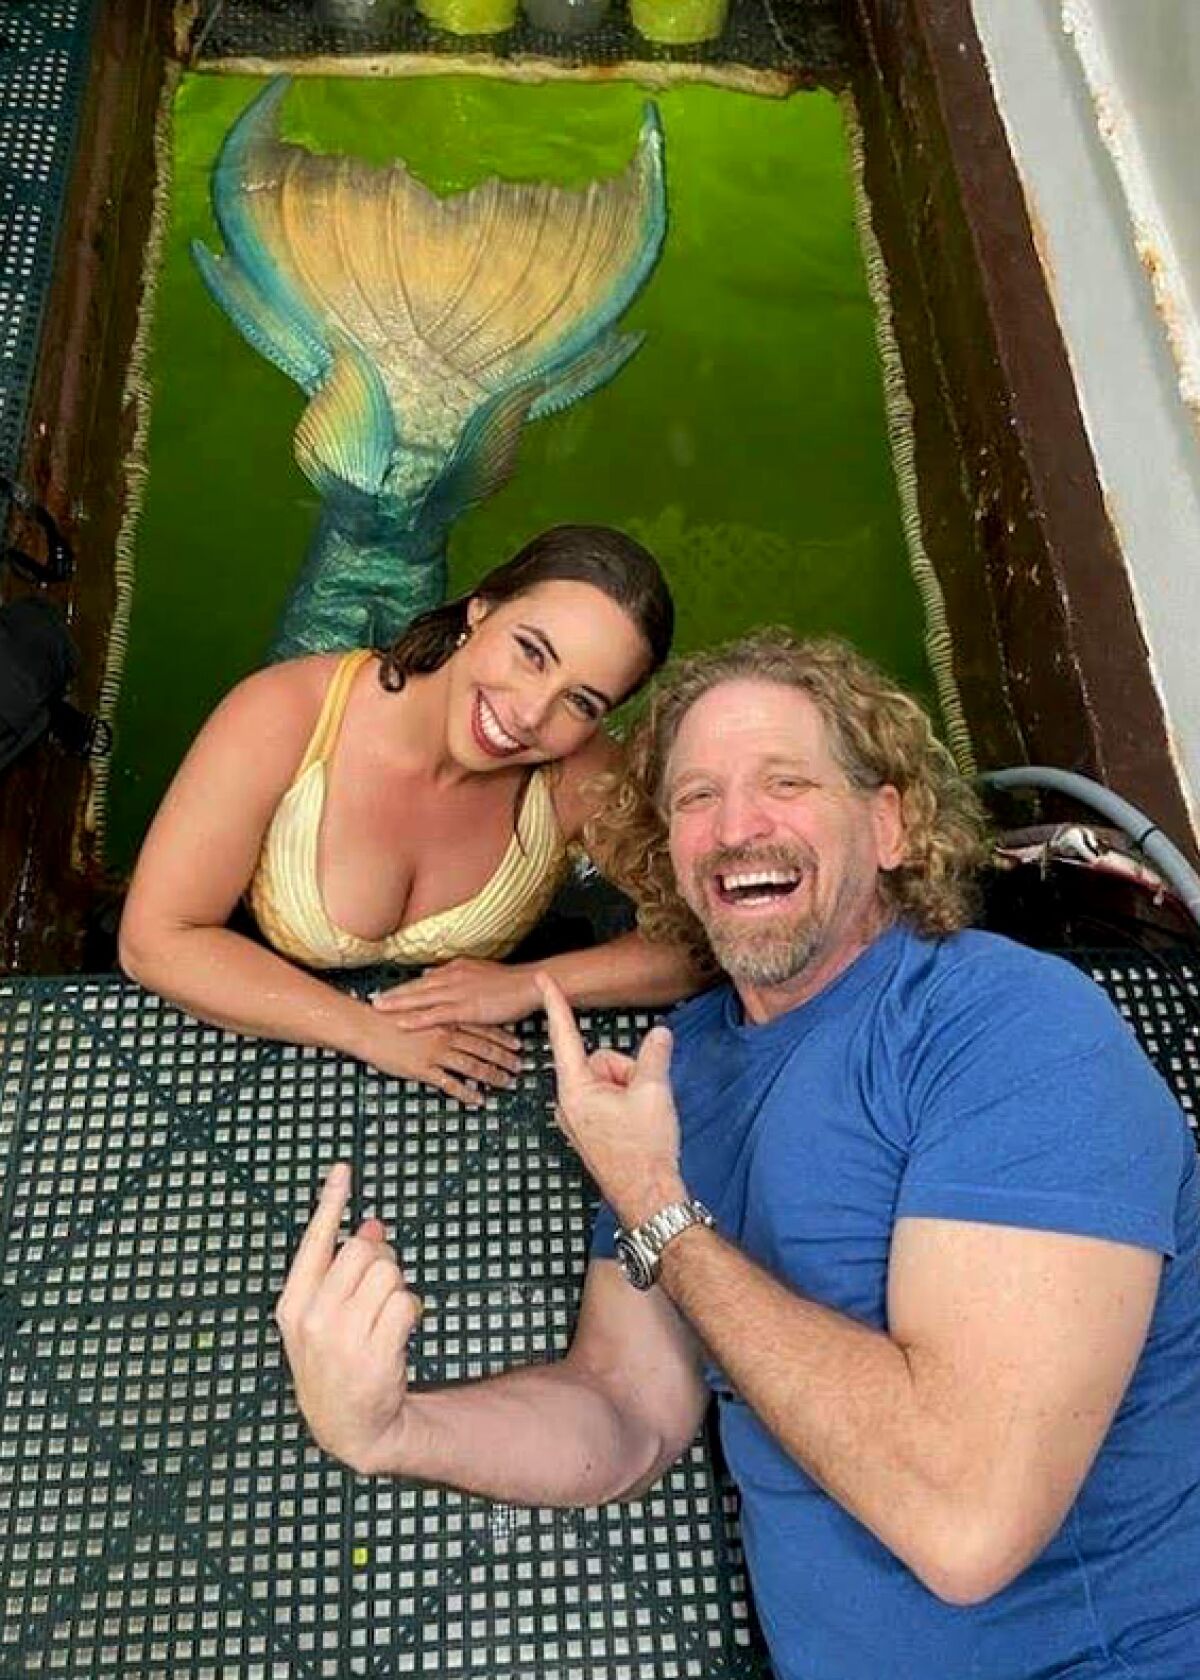 A man pointing to a woman dressed as a mermaid, seen in the green water through a rectangular opening in the floor